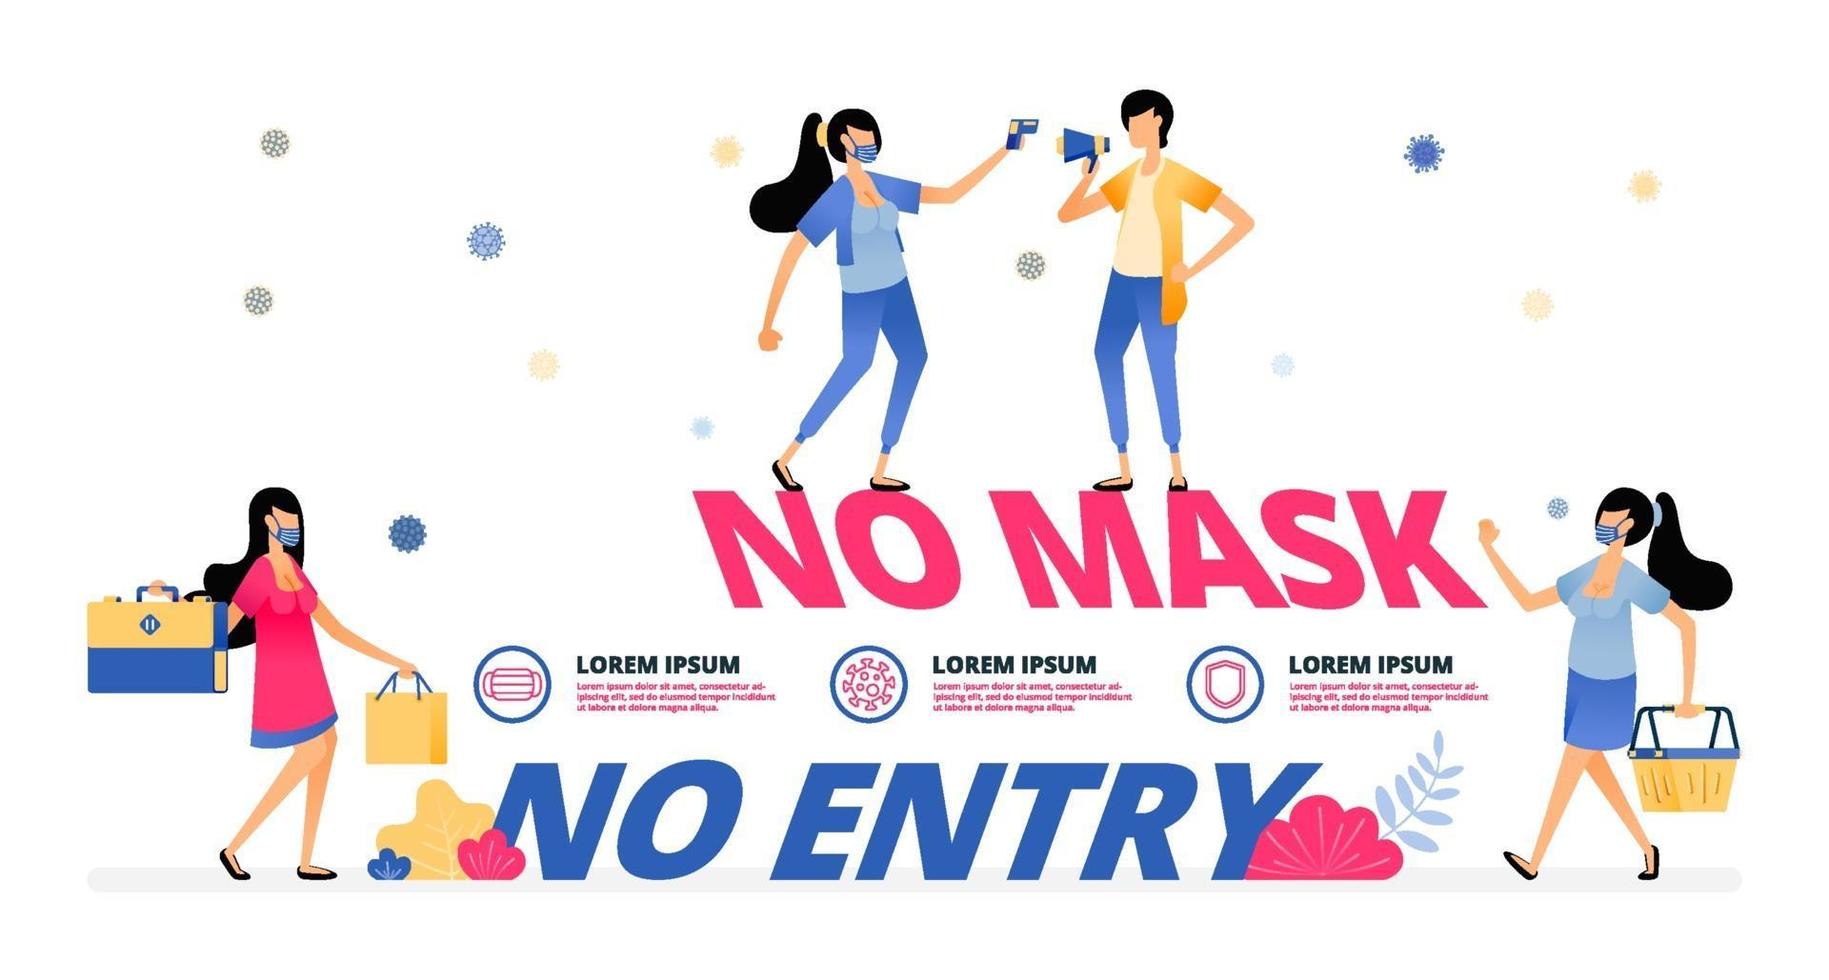 mandatory warning sign to wear a mask to market and shopping center vector